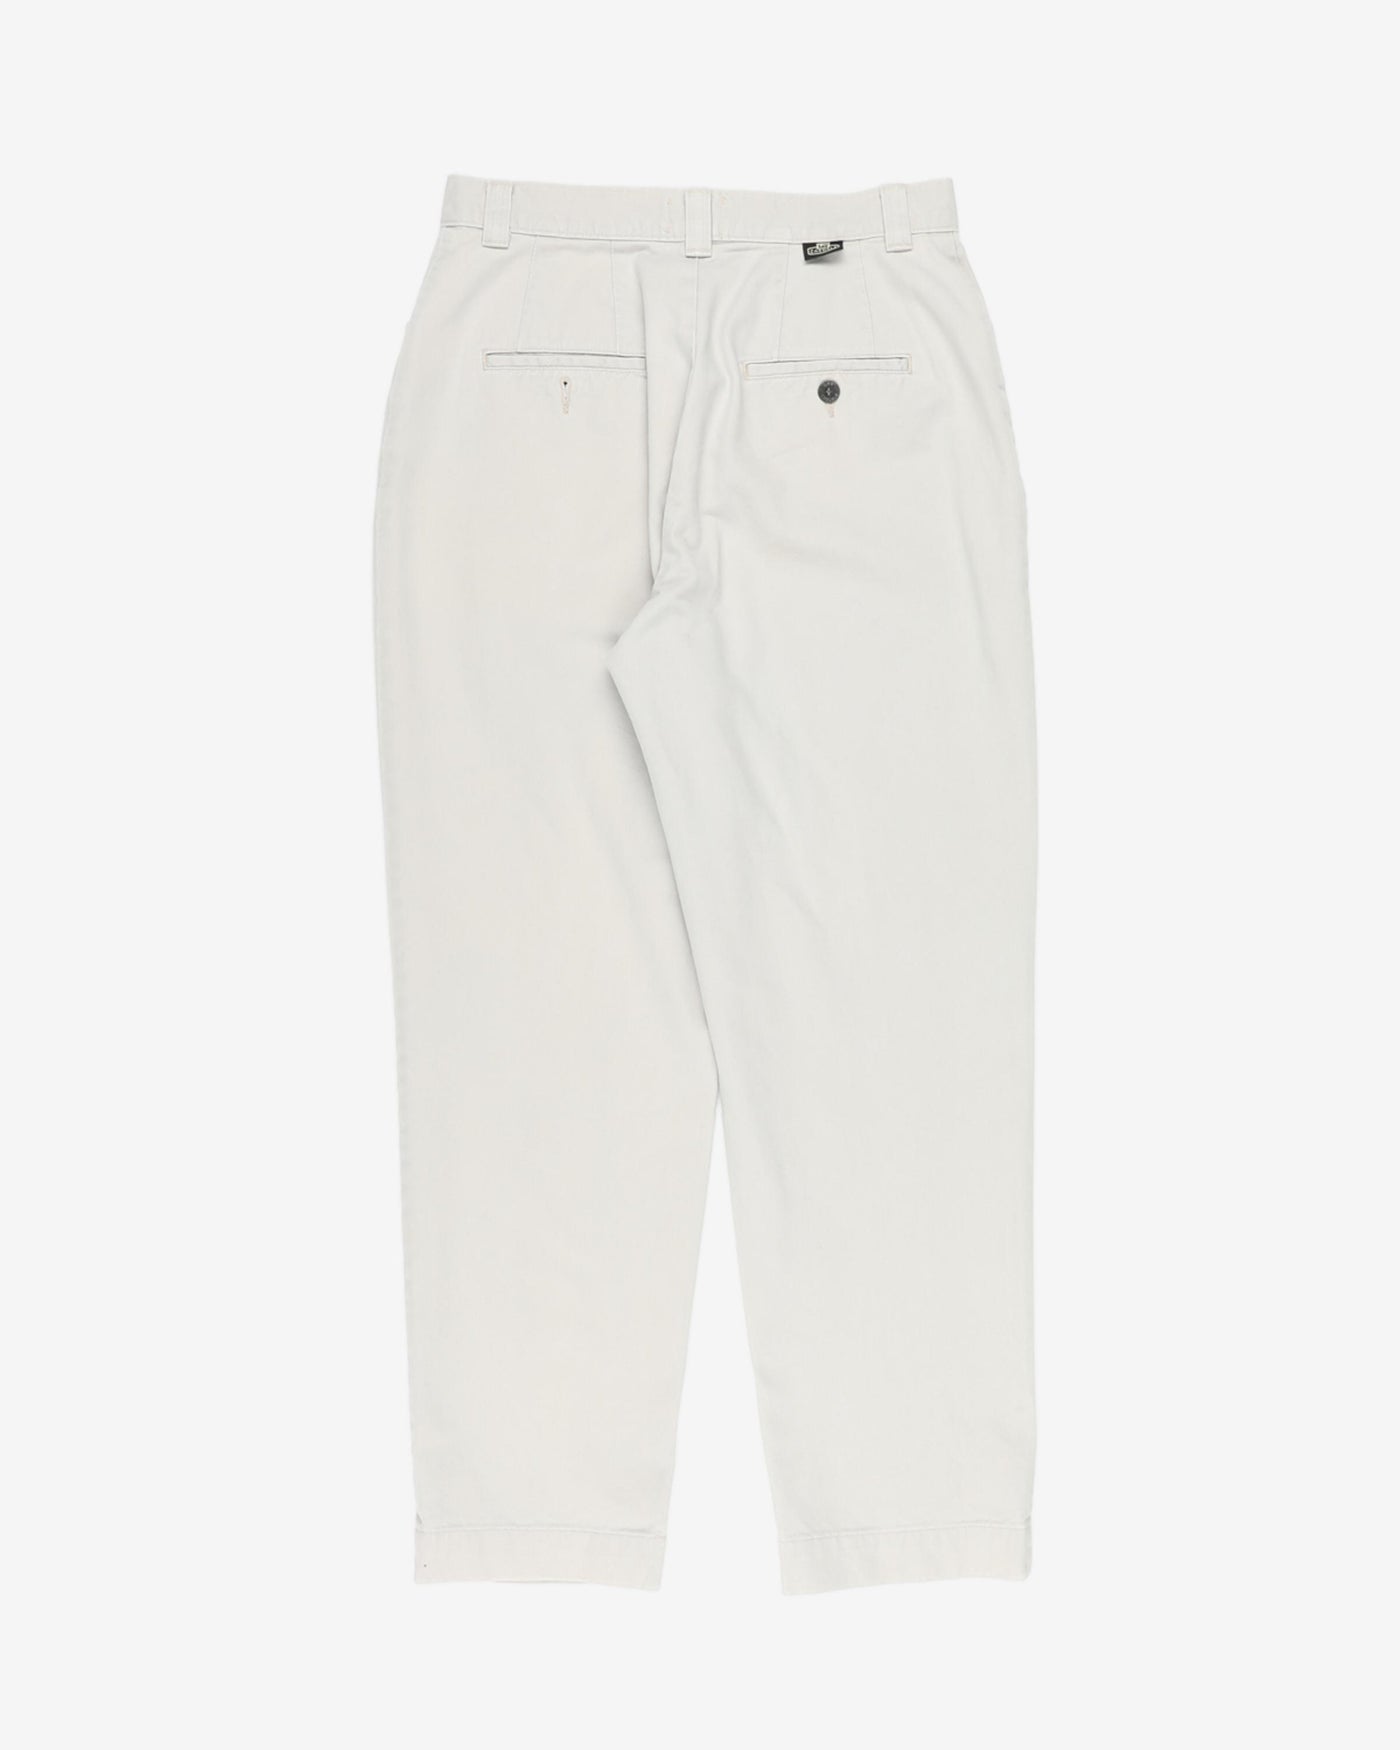 Lee Casuals Beige Chino Trousers - W28 L25